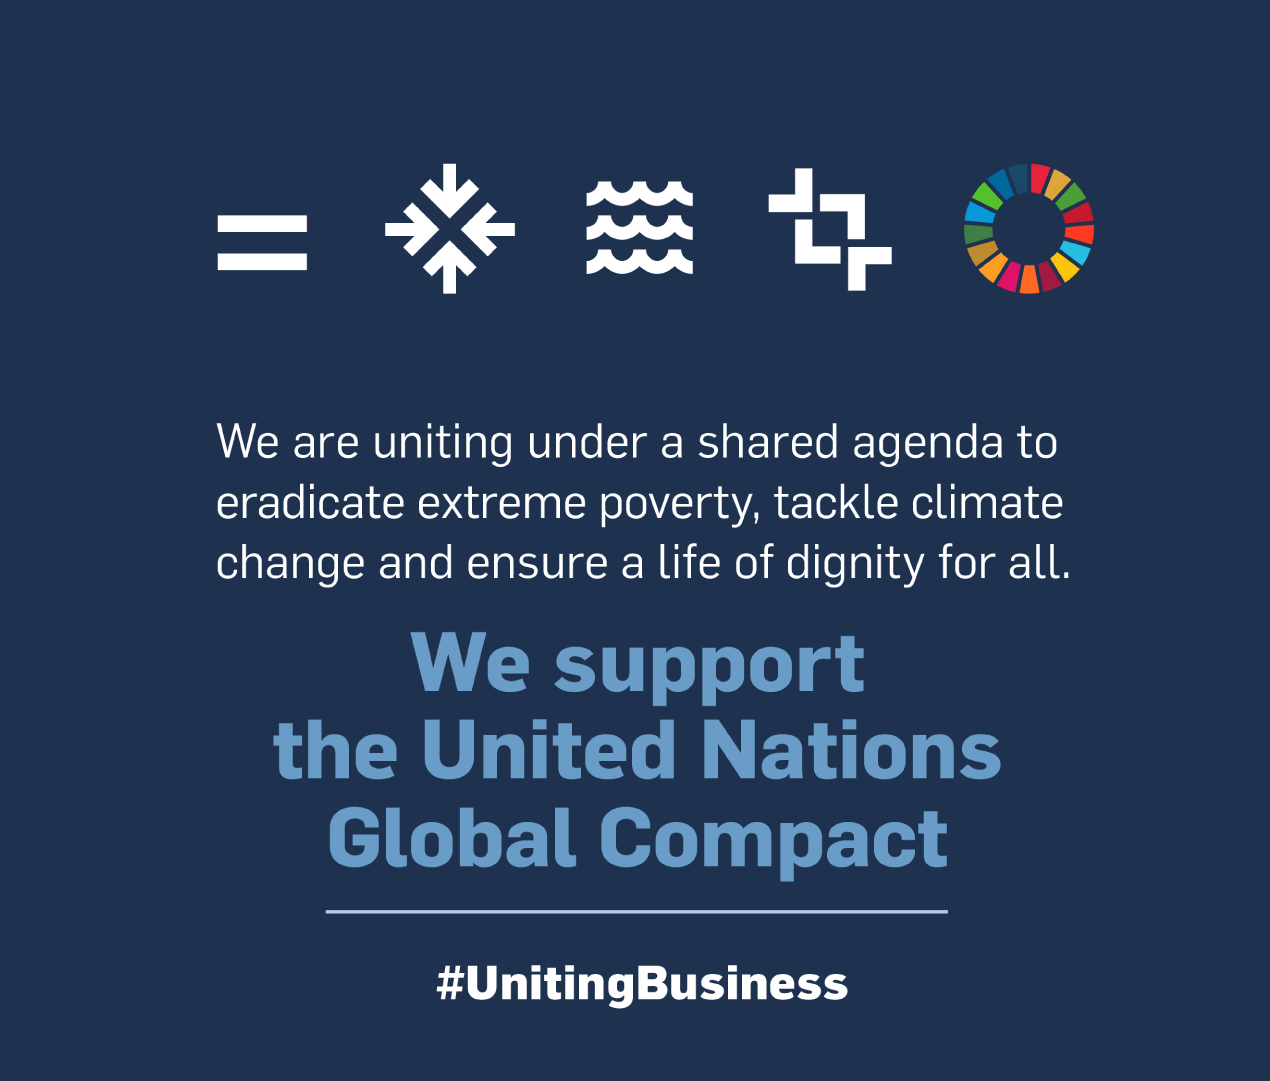 The Aquafil Group adheres to the United Nations Global Compact